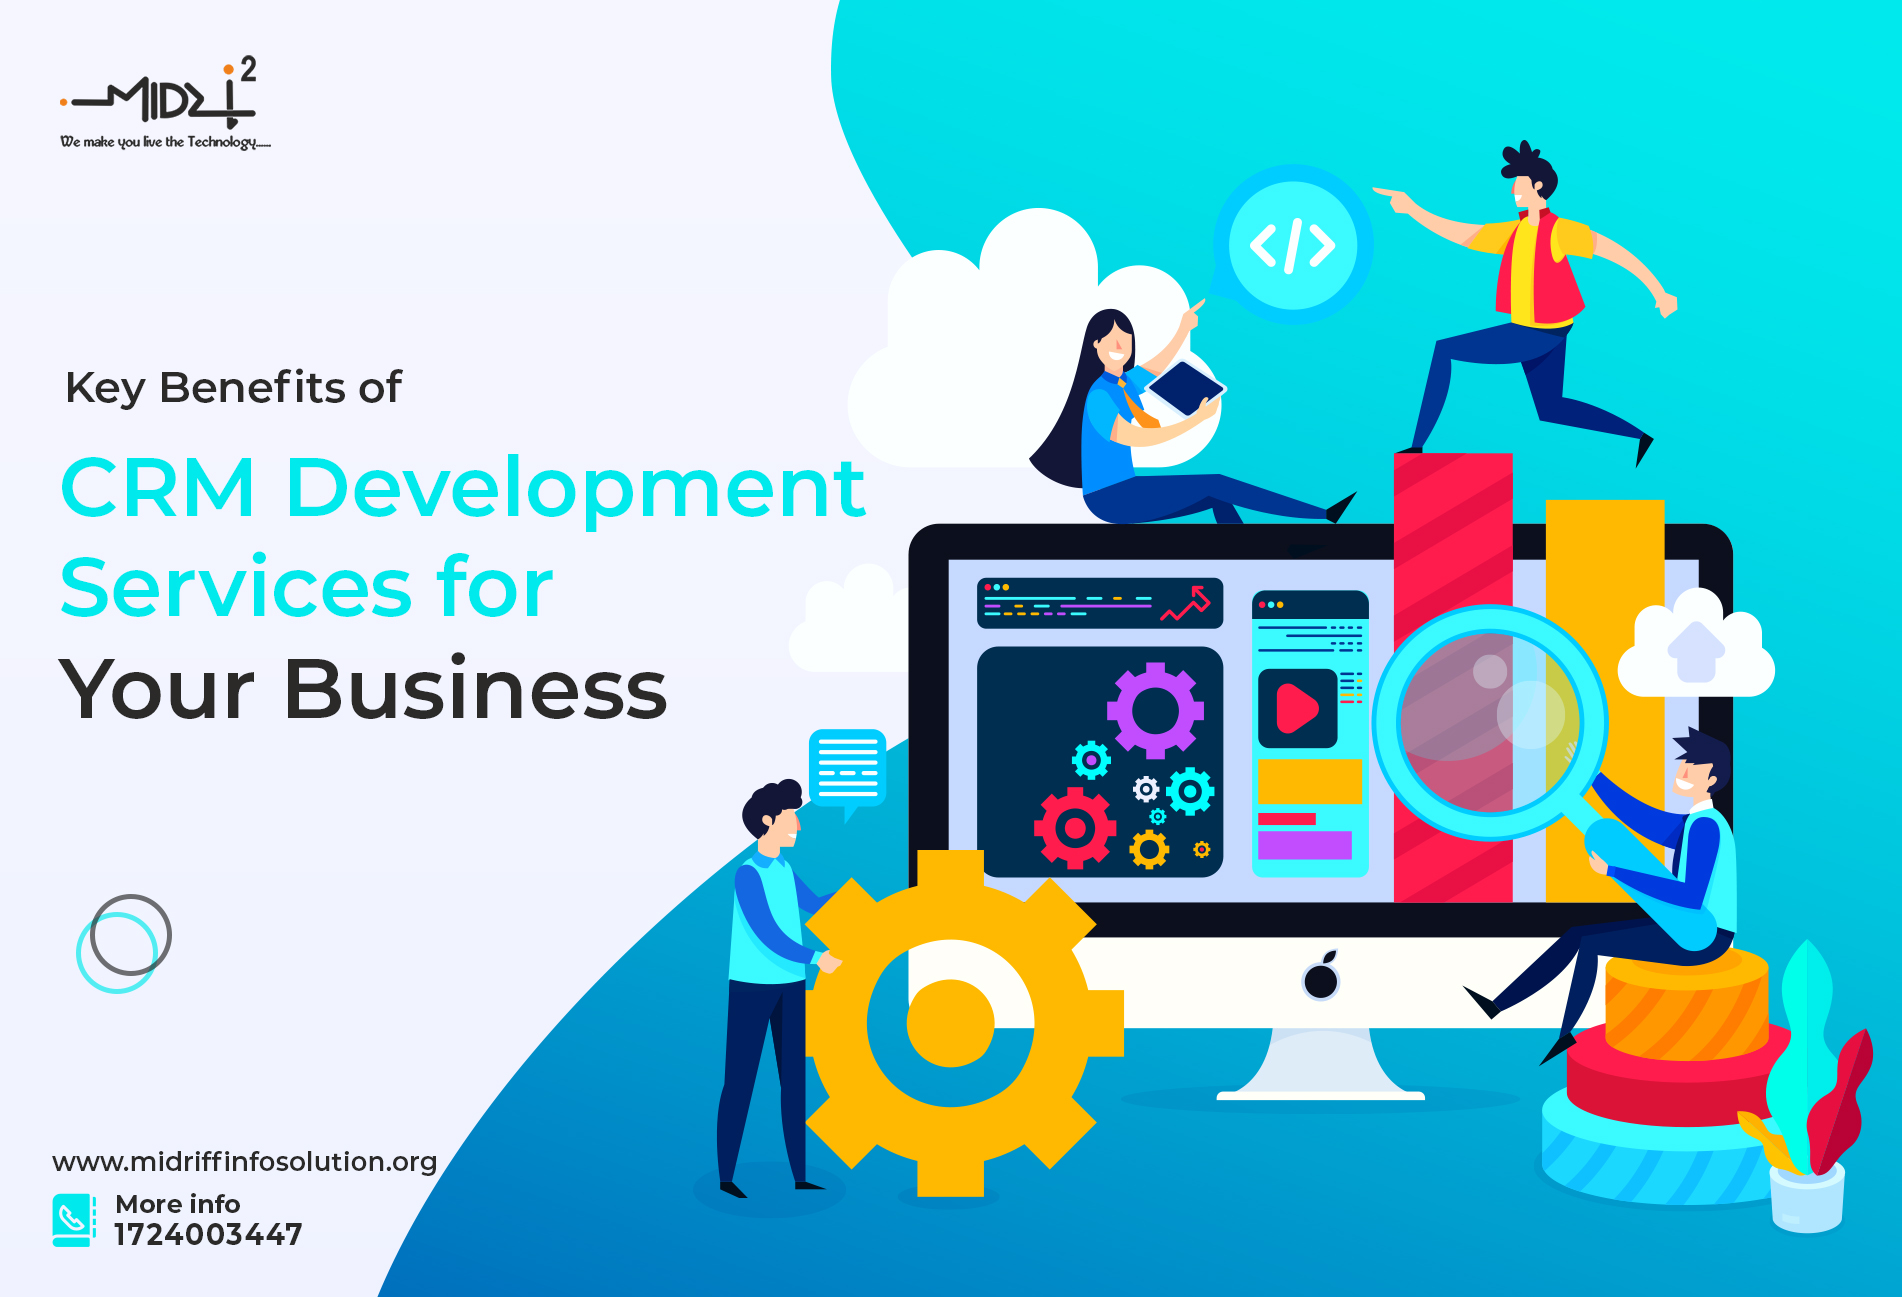 Key Benefits of CRM Development Services for Your Business